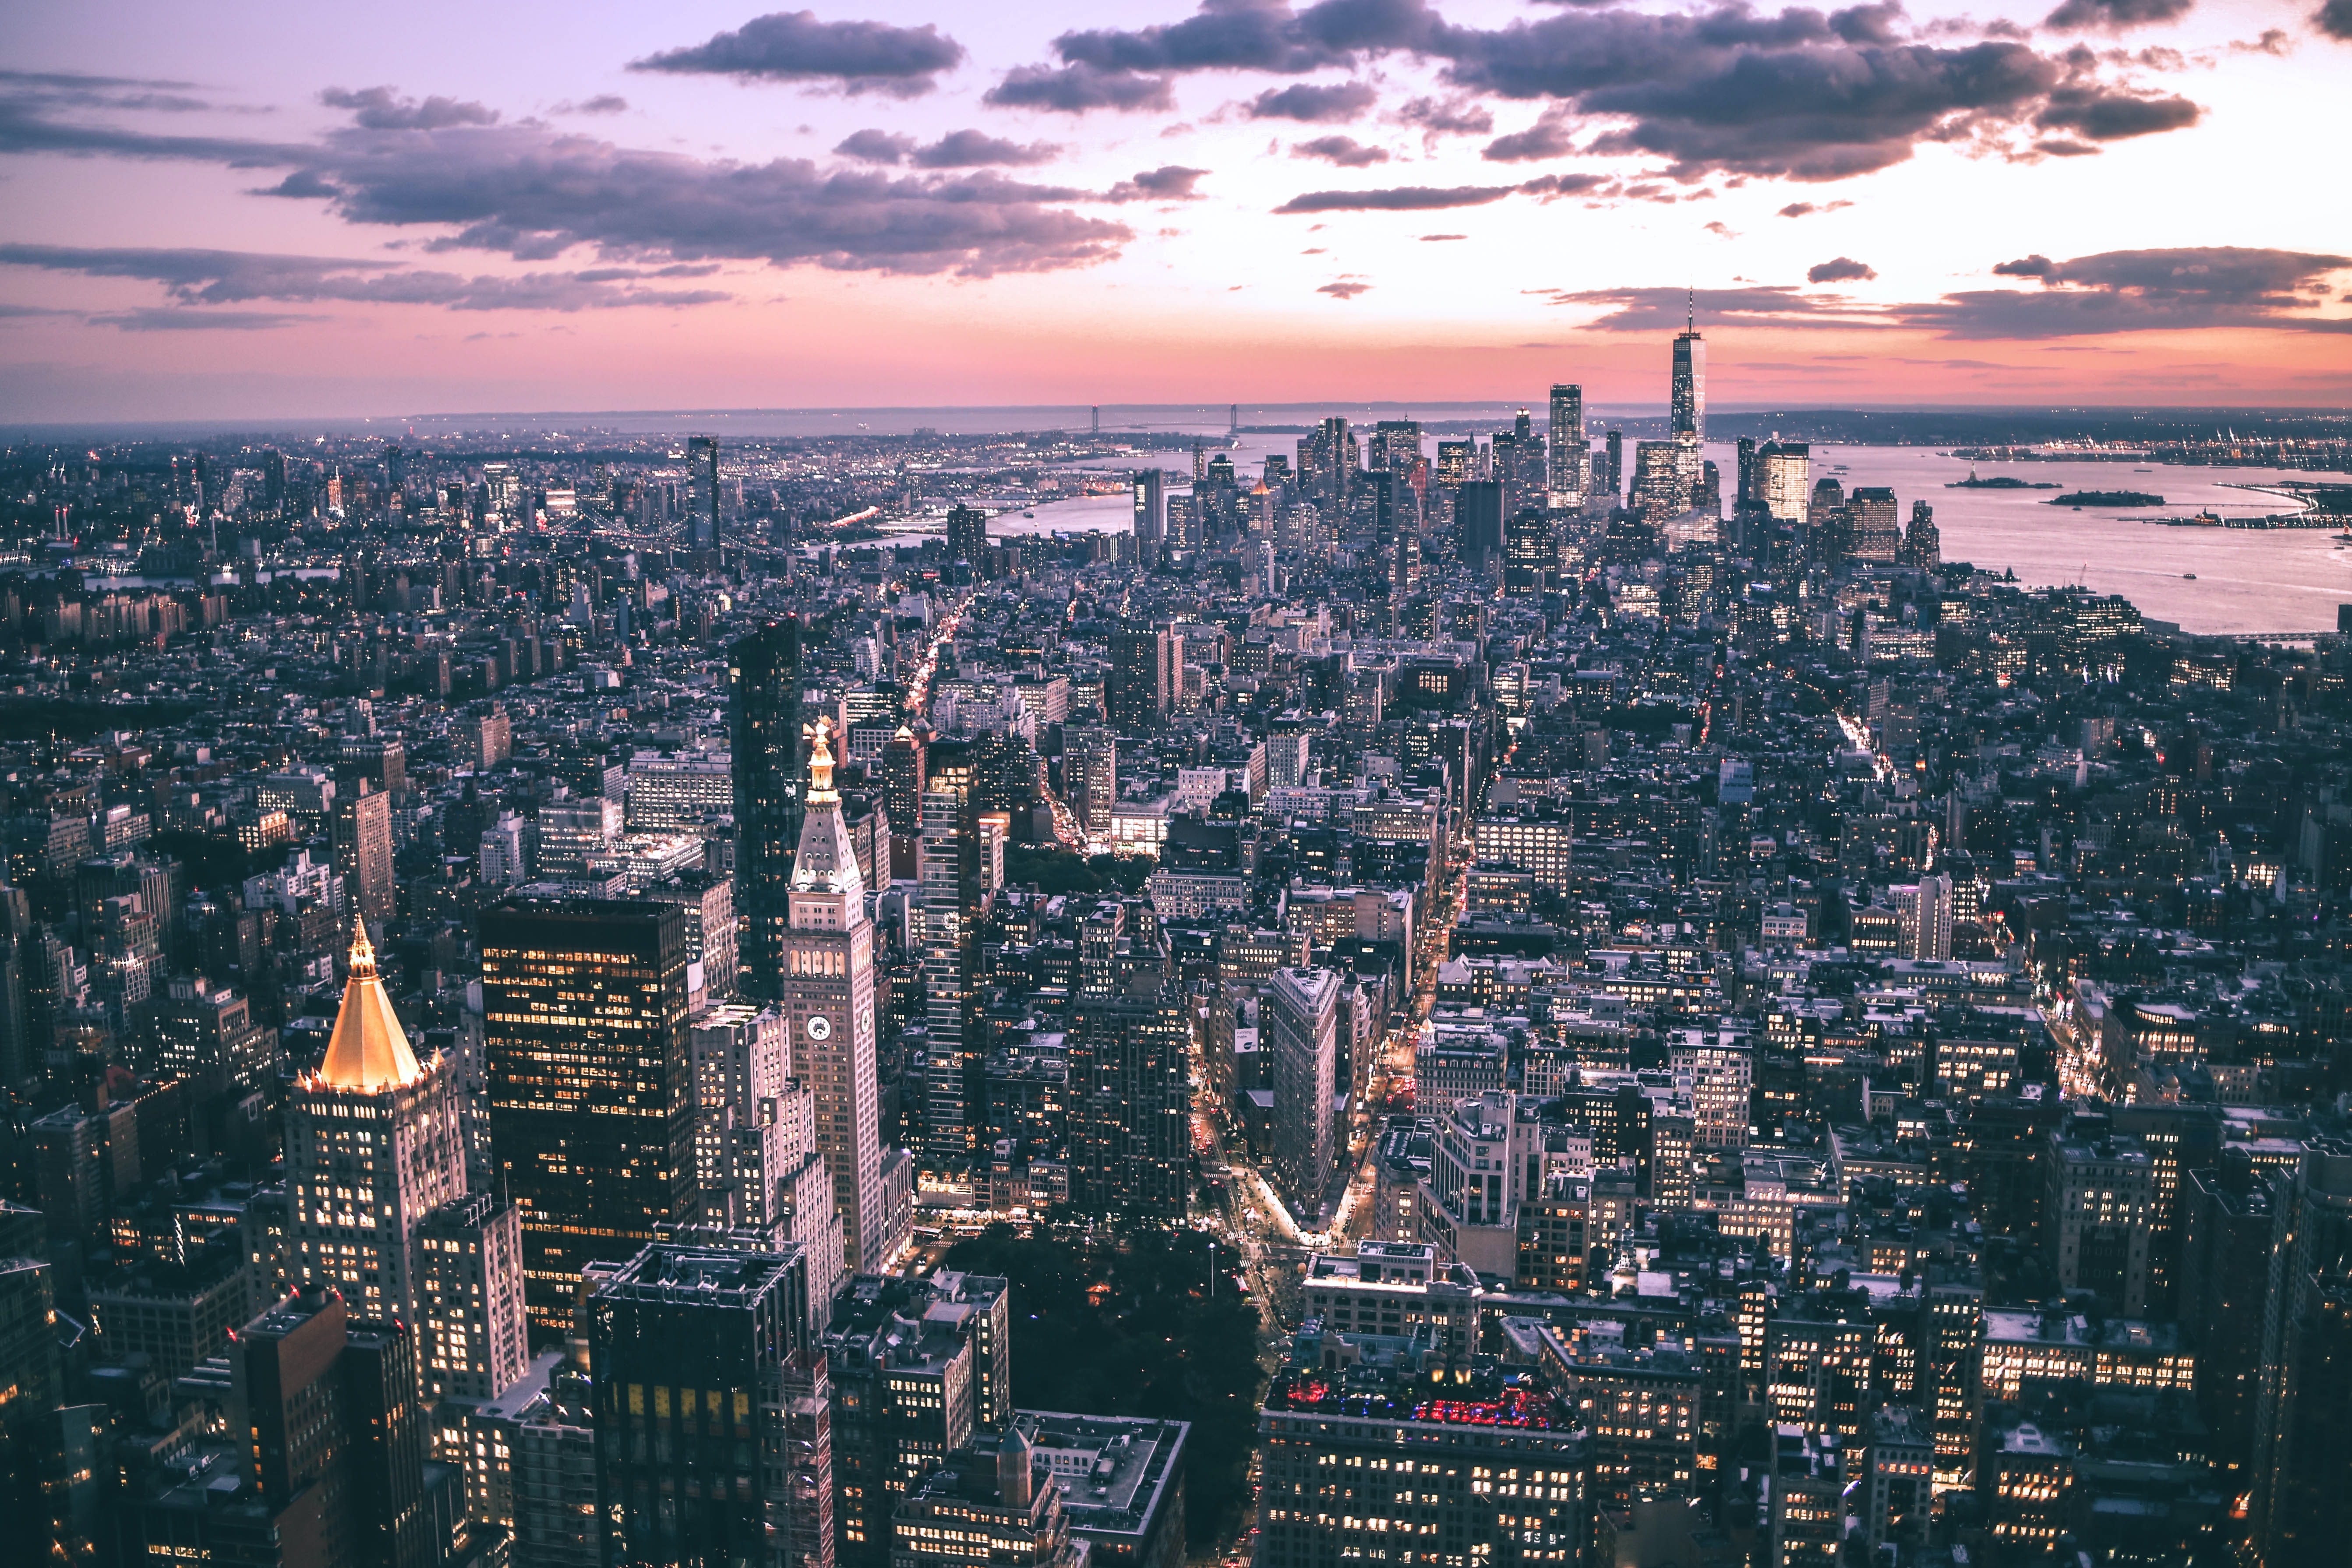 cities, city, building, view from above, skyscrapers, megapolis, megalopolis, urban landscape, cityscape, new york iphone wallpaper